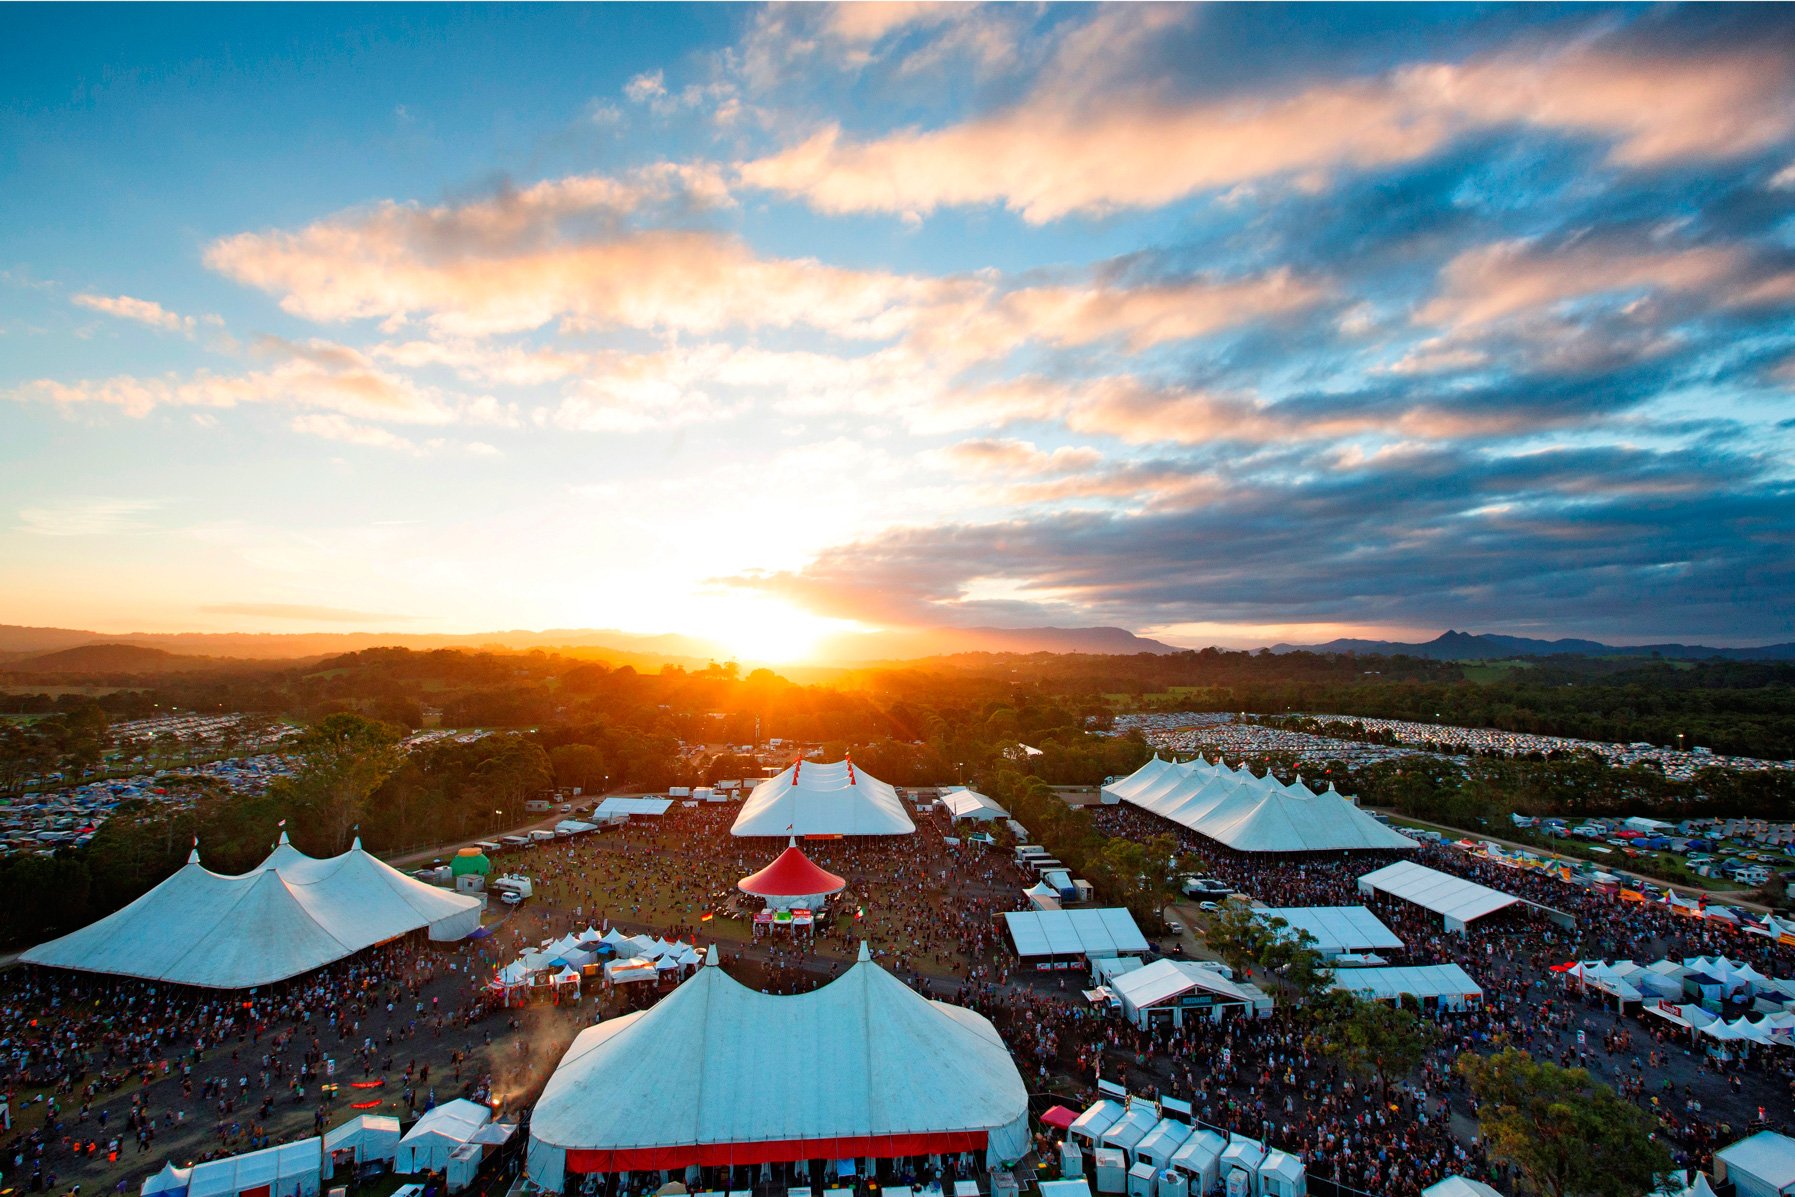 Aussie Promoters and Venues Made US$170m From Ticket Sales in Q3